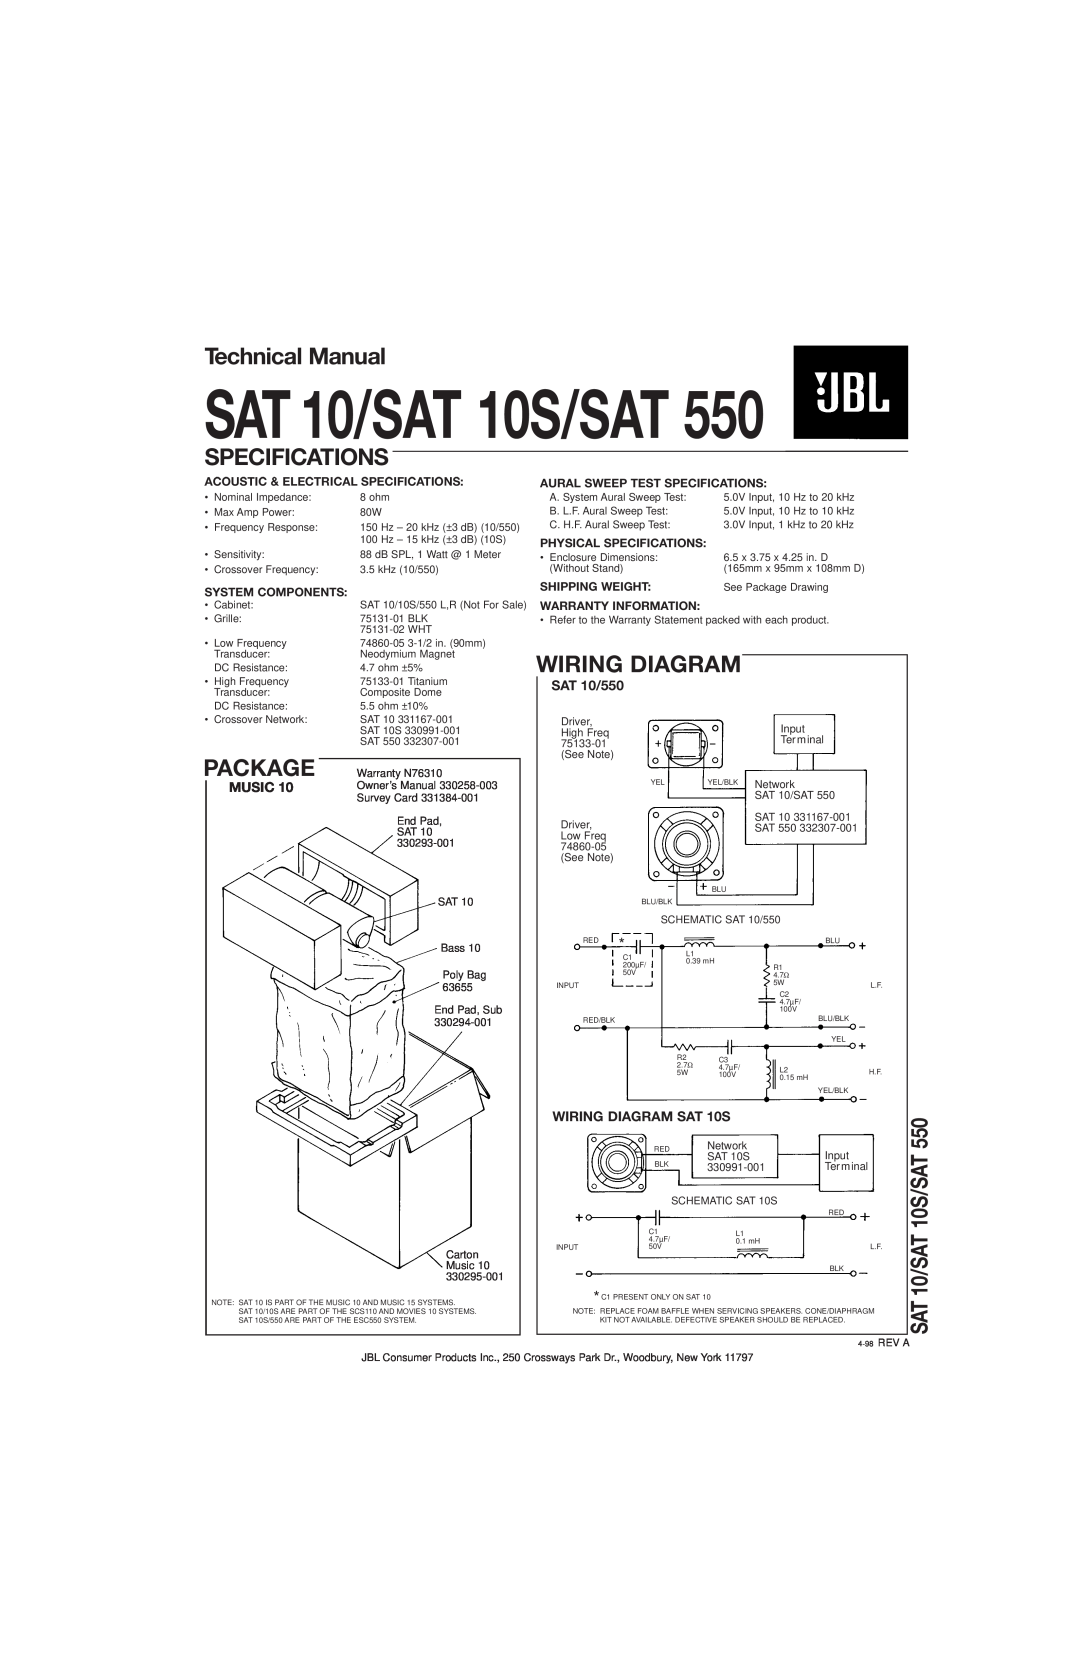 JBL H8192 technical manual Technical Manual, Specifications, SAT 10/SAT 10S/SAT, Package, Wiring Diagram, Music 